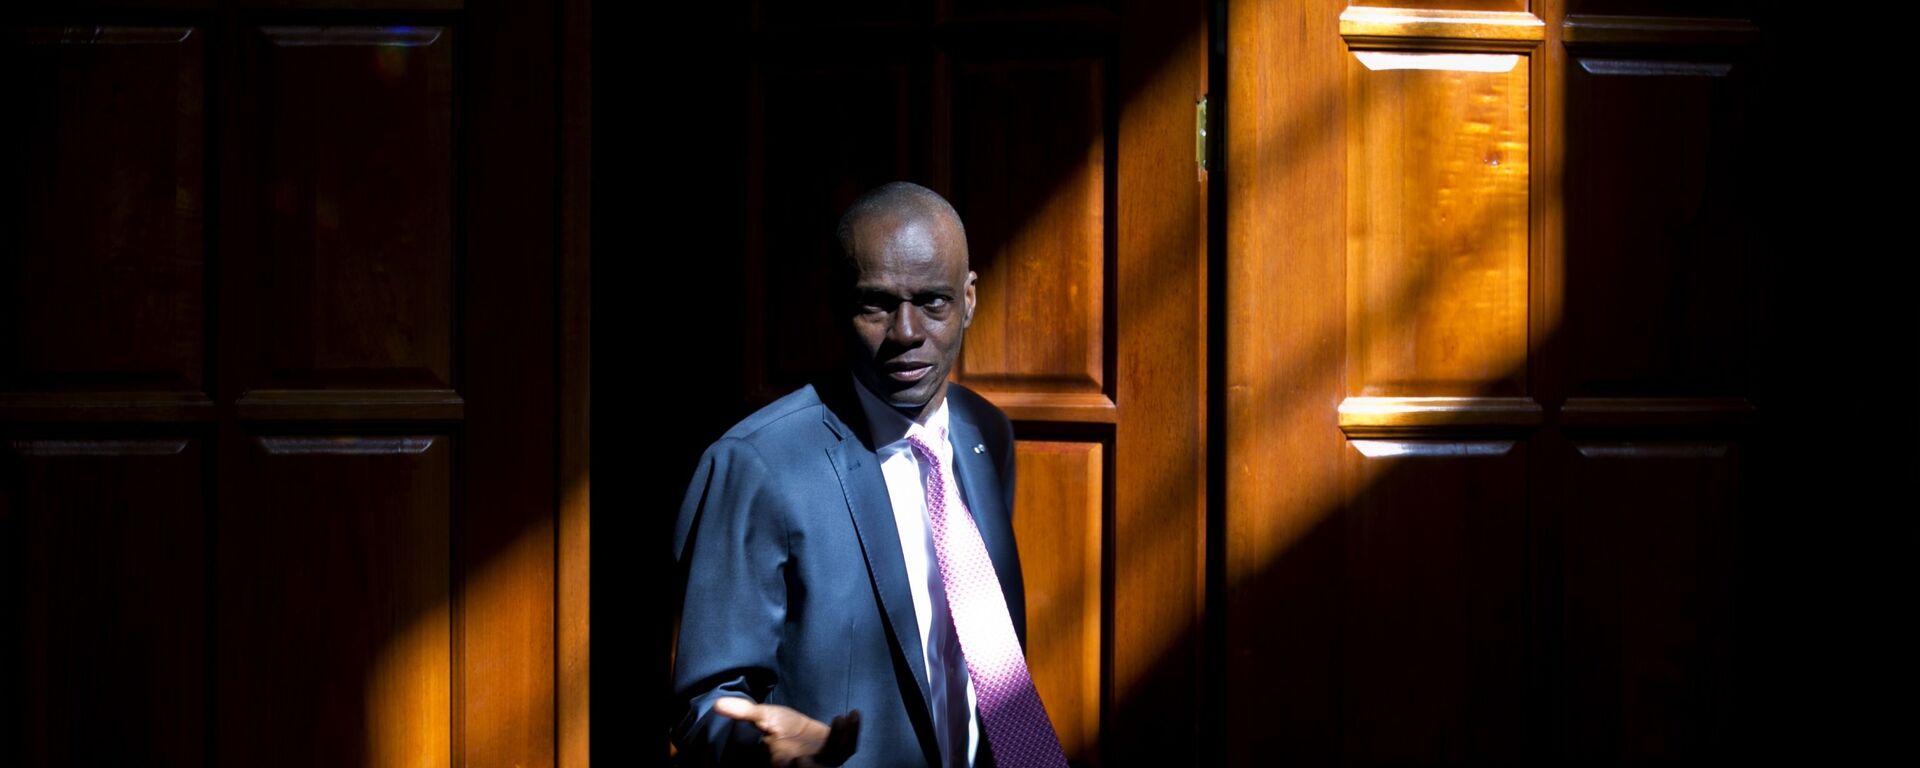 Haiti's President Jovenel Moise arrives for an interview at his home in Petion-Ville, a suburb of Port-au-Prince, Haiti, Friday, Feb. 7, 2020. Moise said Friday that he is optimistic that negotiations with a coalition of his political opponents will succeed in forging a power-sharing deal to end months of deadlock that have left the country without a functioning government. - Sputnik International, 1920